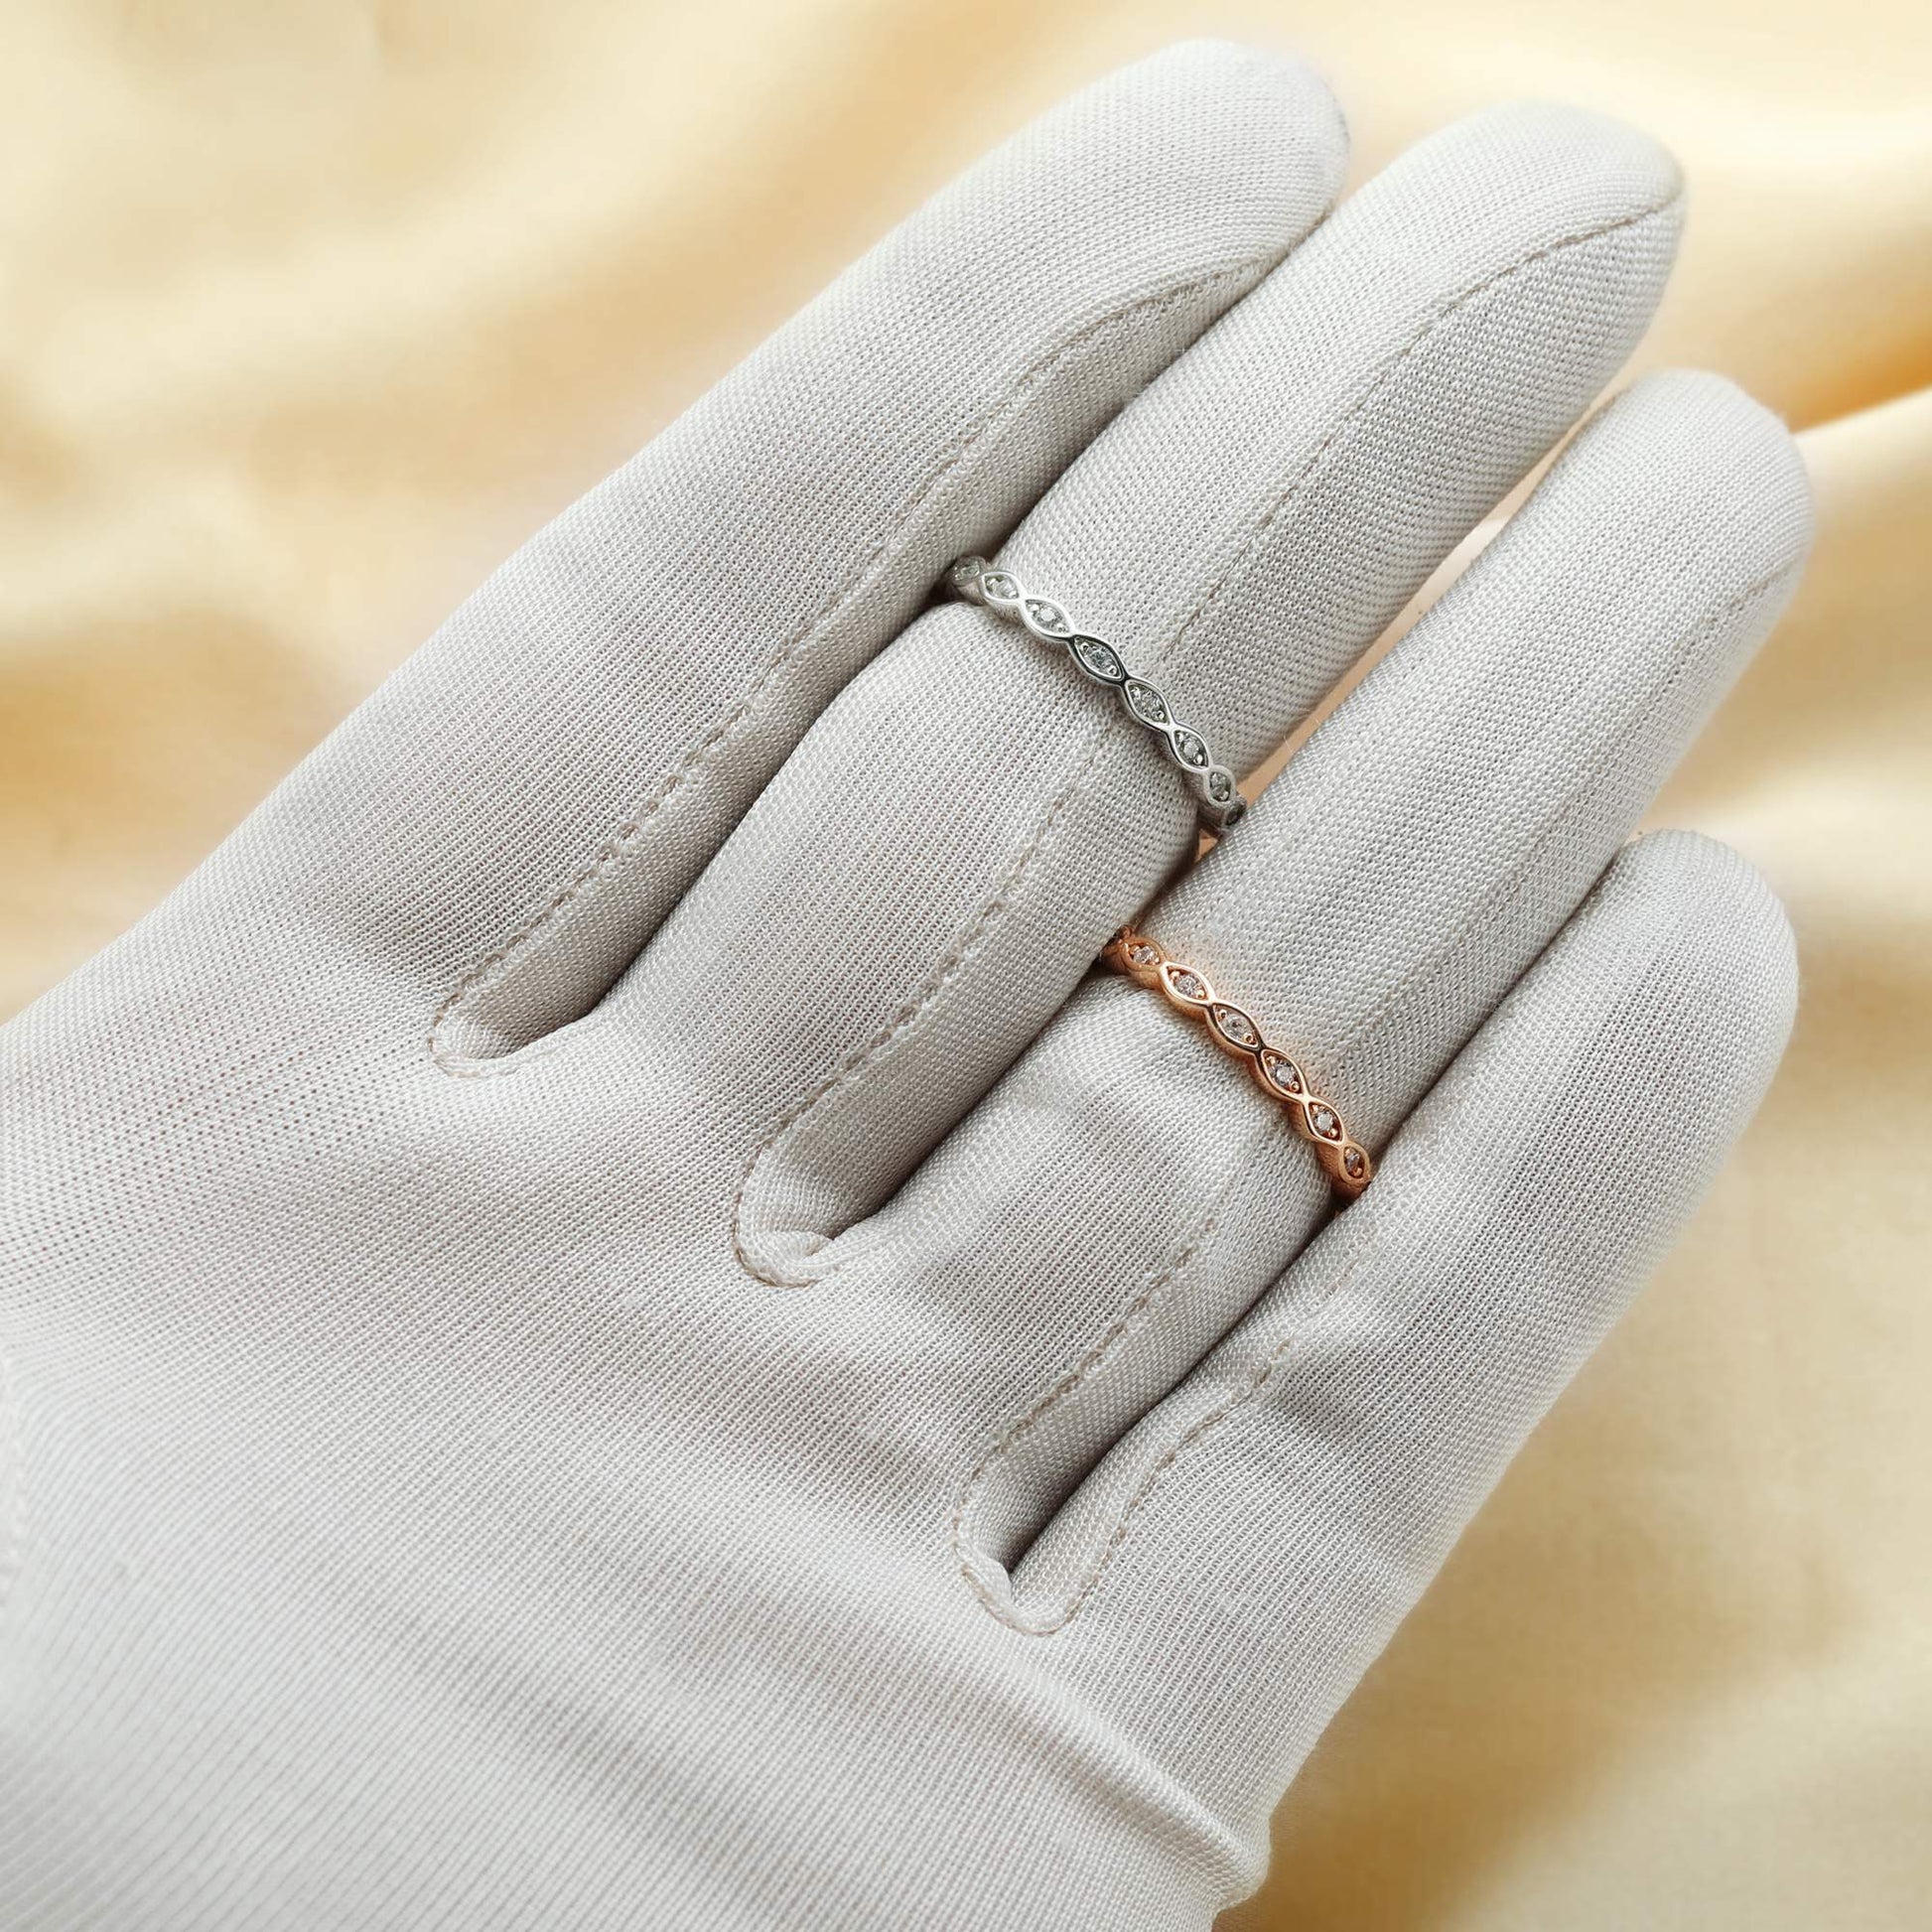 A hand wearing one silver and one rose gold scalloped ring band set with small clear stones.